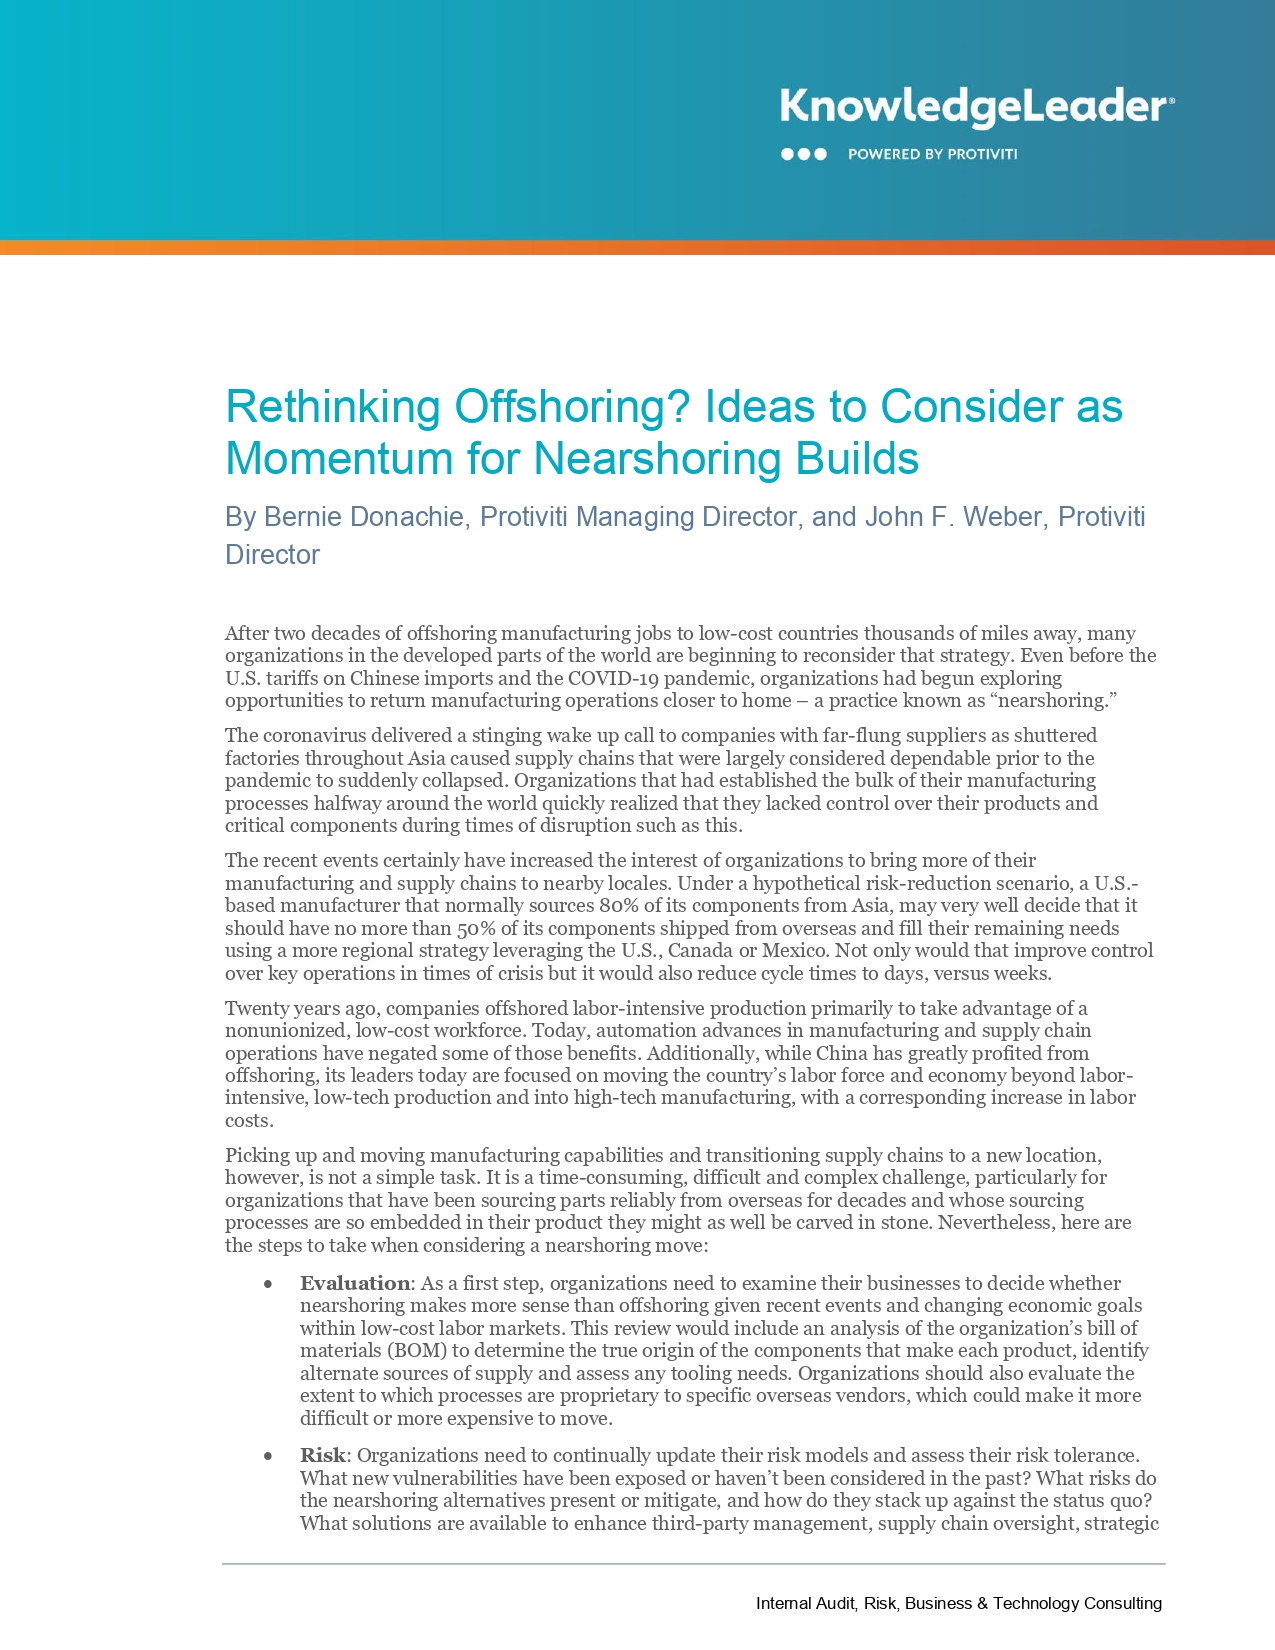 Rethinking Offshoring Ideas to Consider as Momentum for Nearshoring Builds